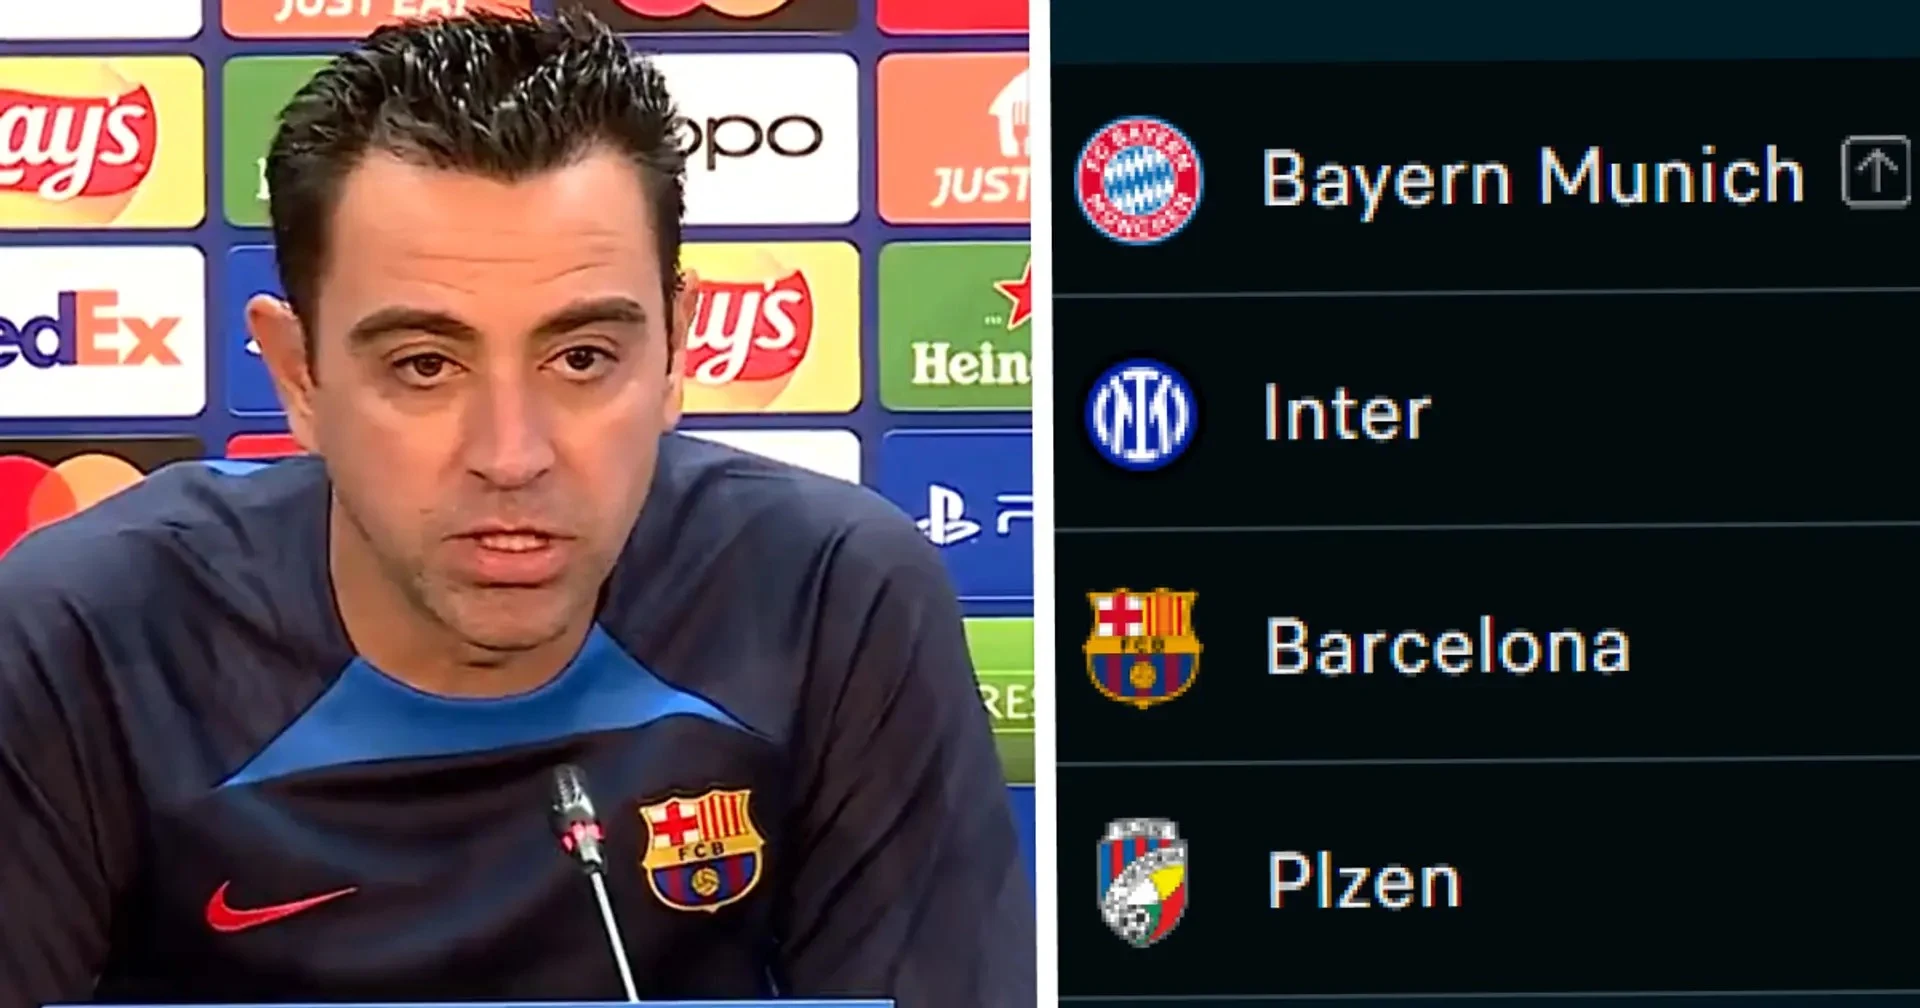 Xavi on Bayern clash: 'We still have hope to qualify. We need more than a miracle'